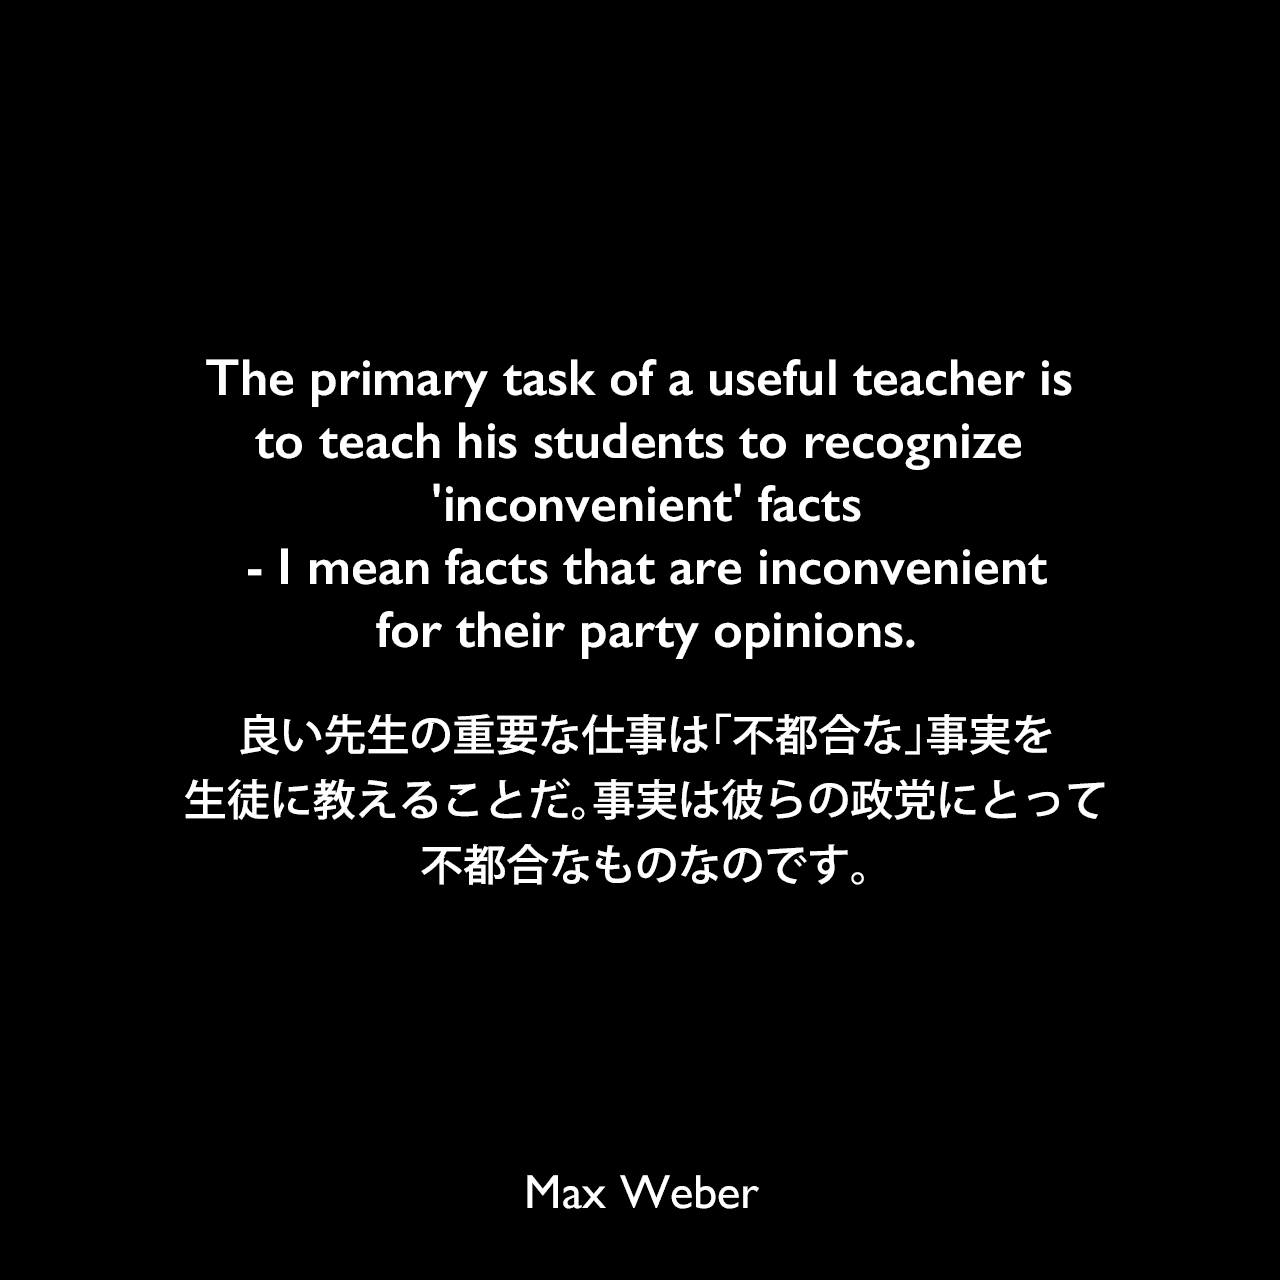 The primary task of a useful teacher is to teach his students to recognize 'inconvenient' facts - I mean facts that are inconvenient for their party opinions.良い先生の重要な仕事は「不都合な」事実を生徒に教えることだ。事実は彼らの政党にとって不都合なものなのです。Max Weber